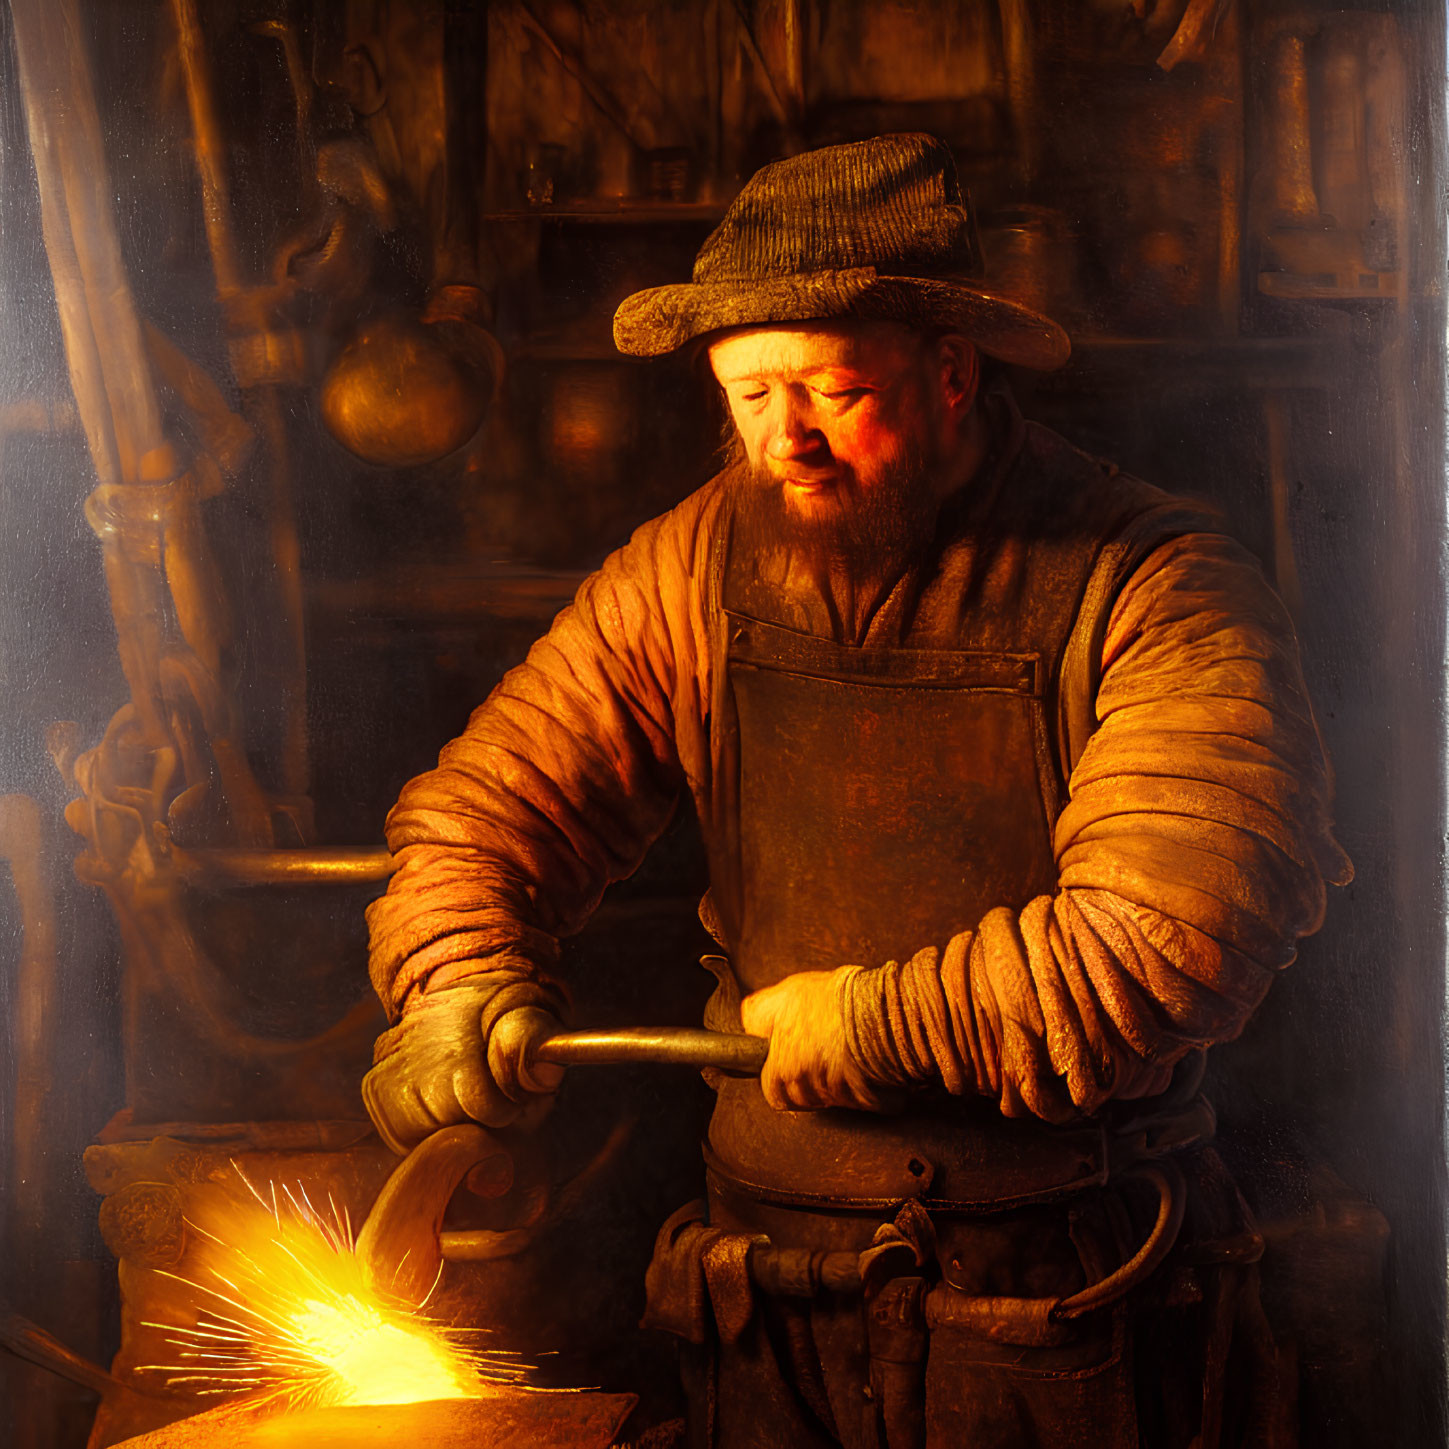 Blacksmith in Hat Crafting Metal on Anvil with Glowing Sparks in Dark Forge